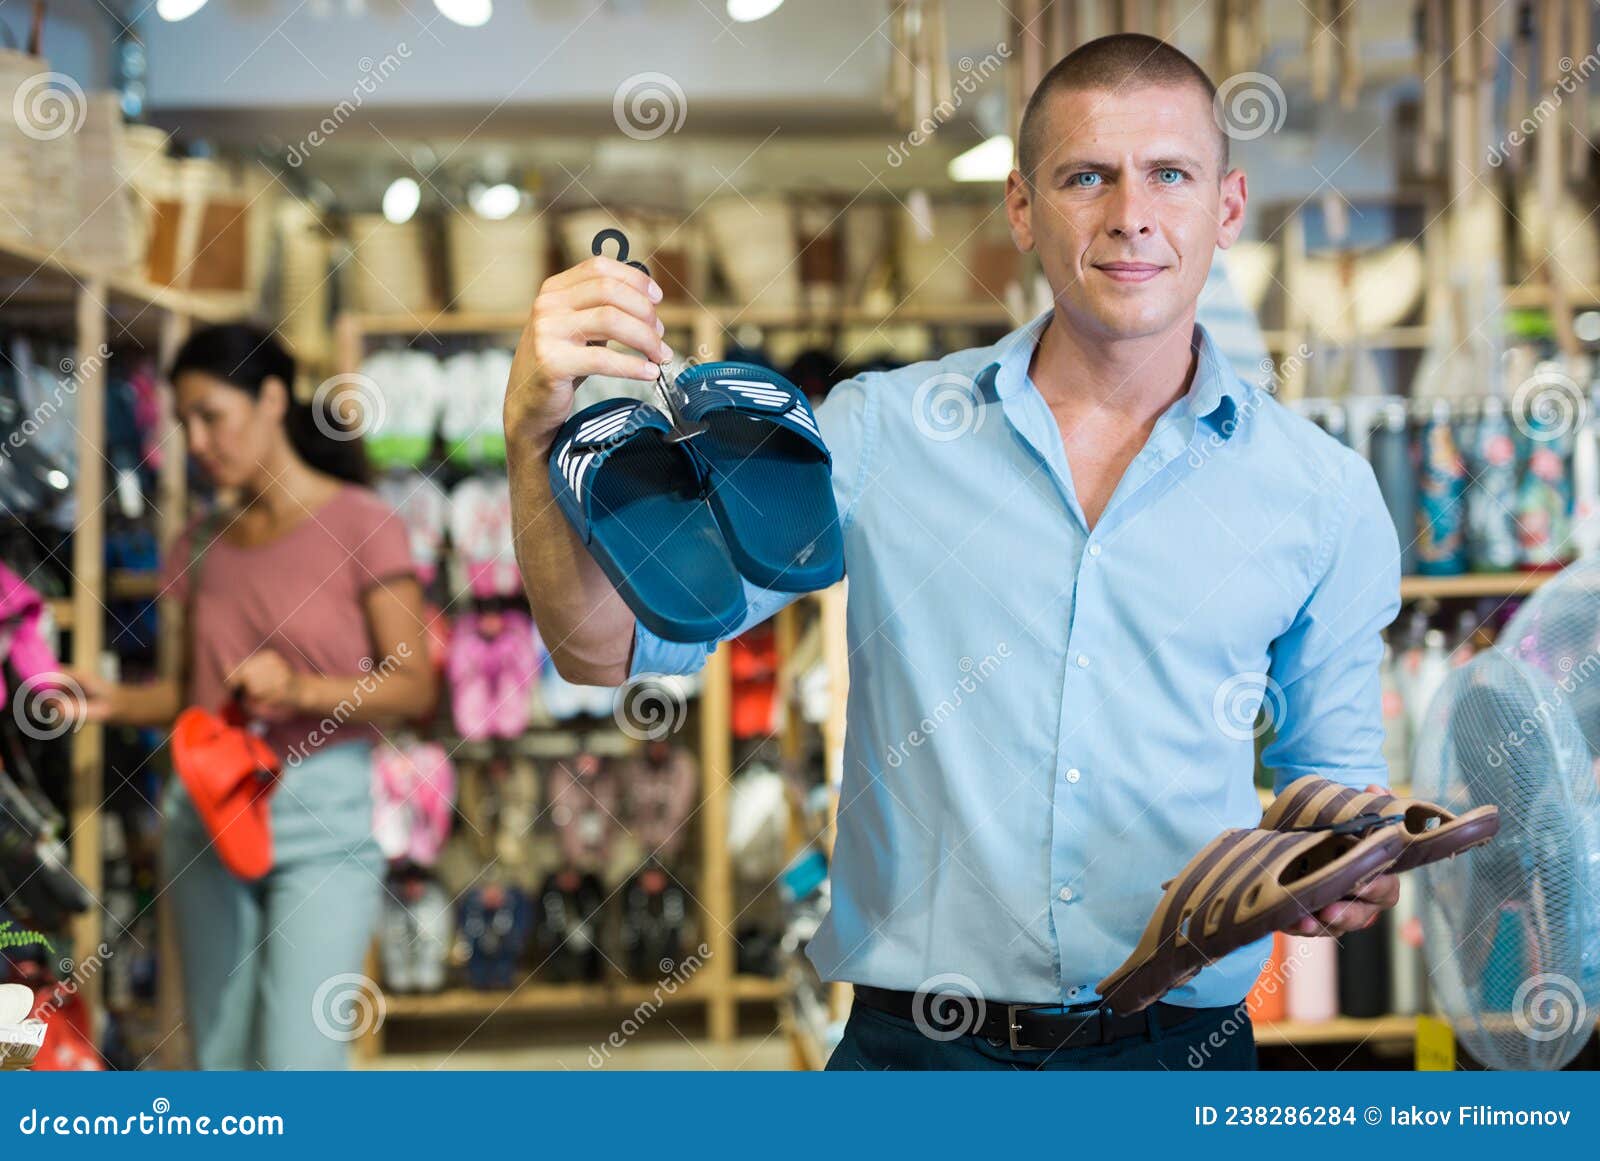 man with pairs of jandals in store